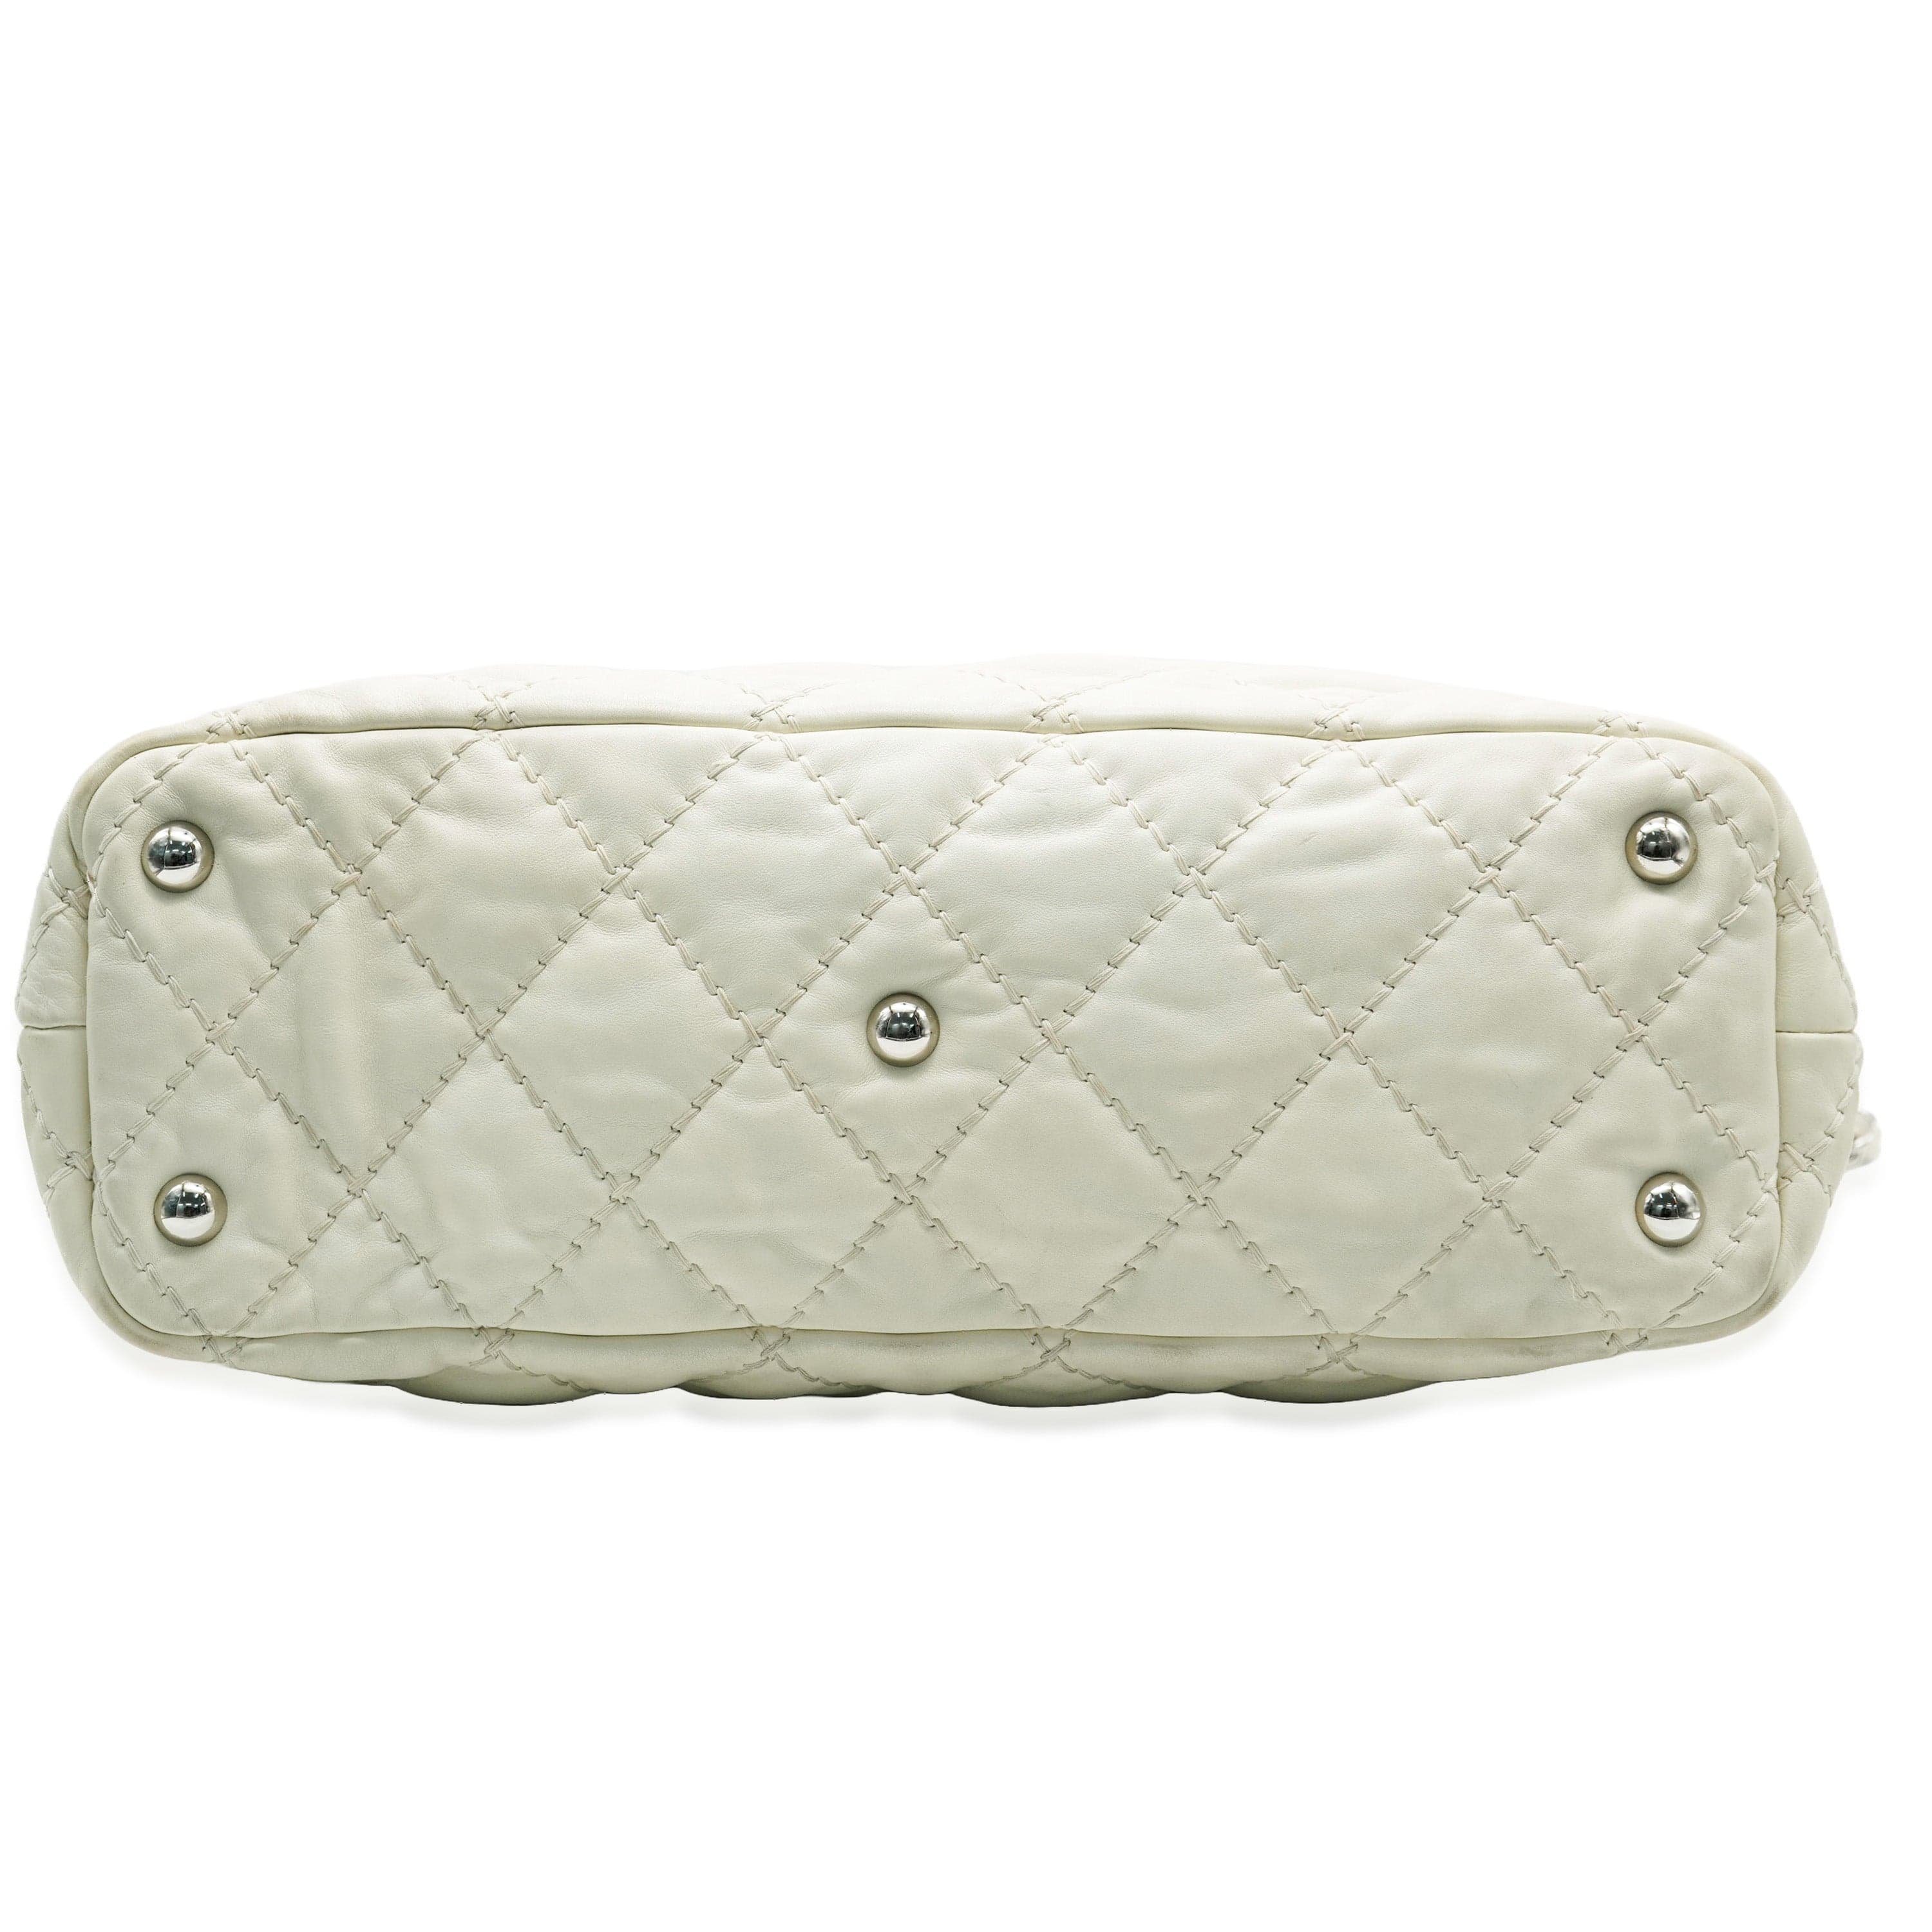 Chanel Chanel White Quilted Calfskin Ultimate Stitch Hobo